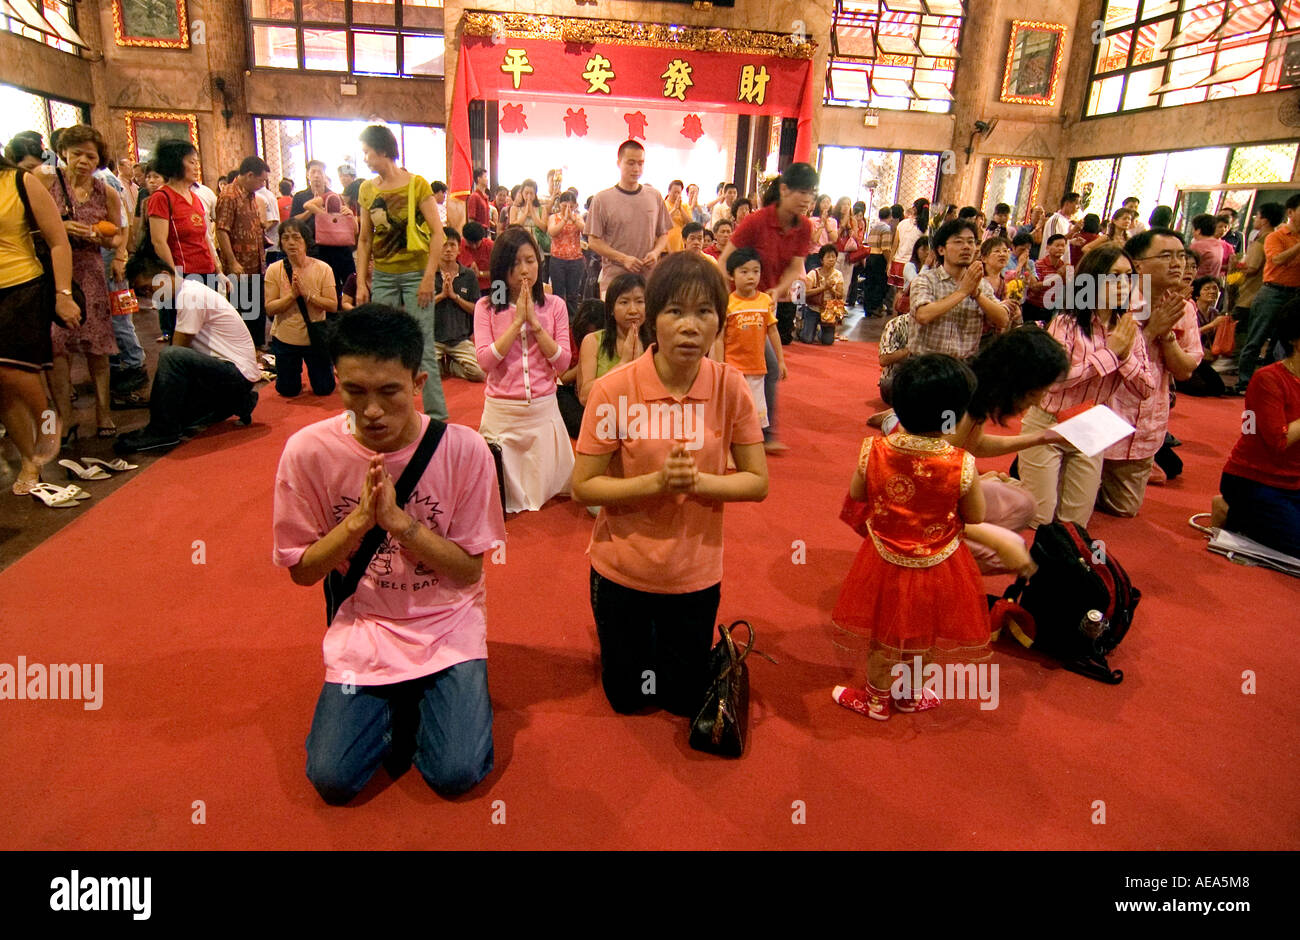 People praying for good fortune inside a Chinese temple in Singapore during the Chinese New Year celebrations. Stock Photo